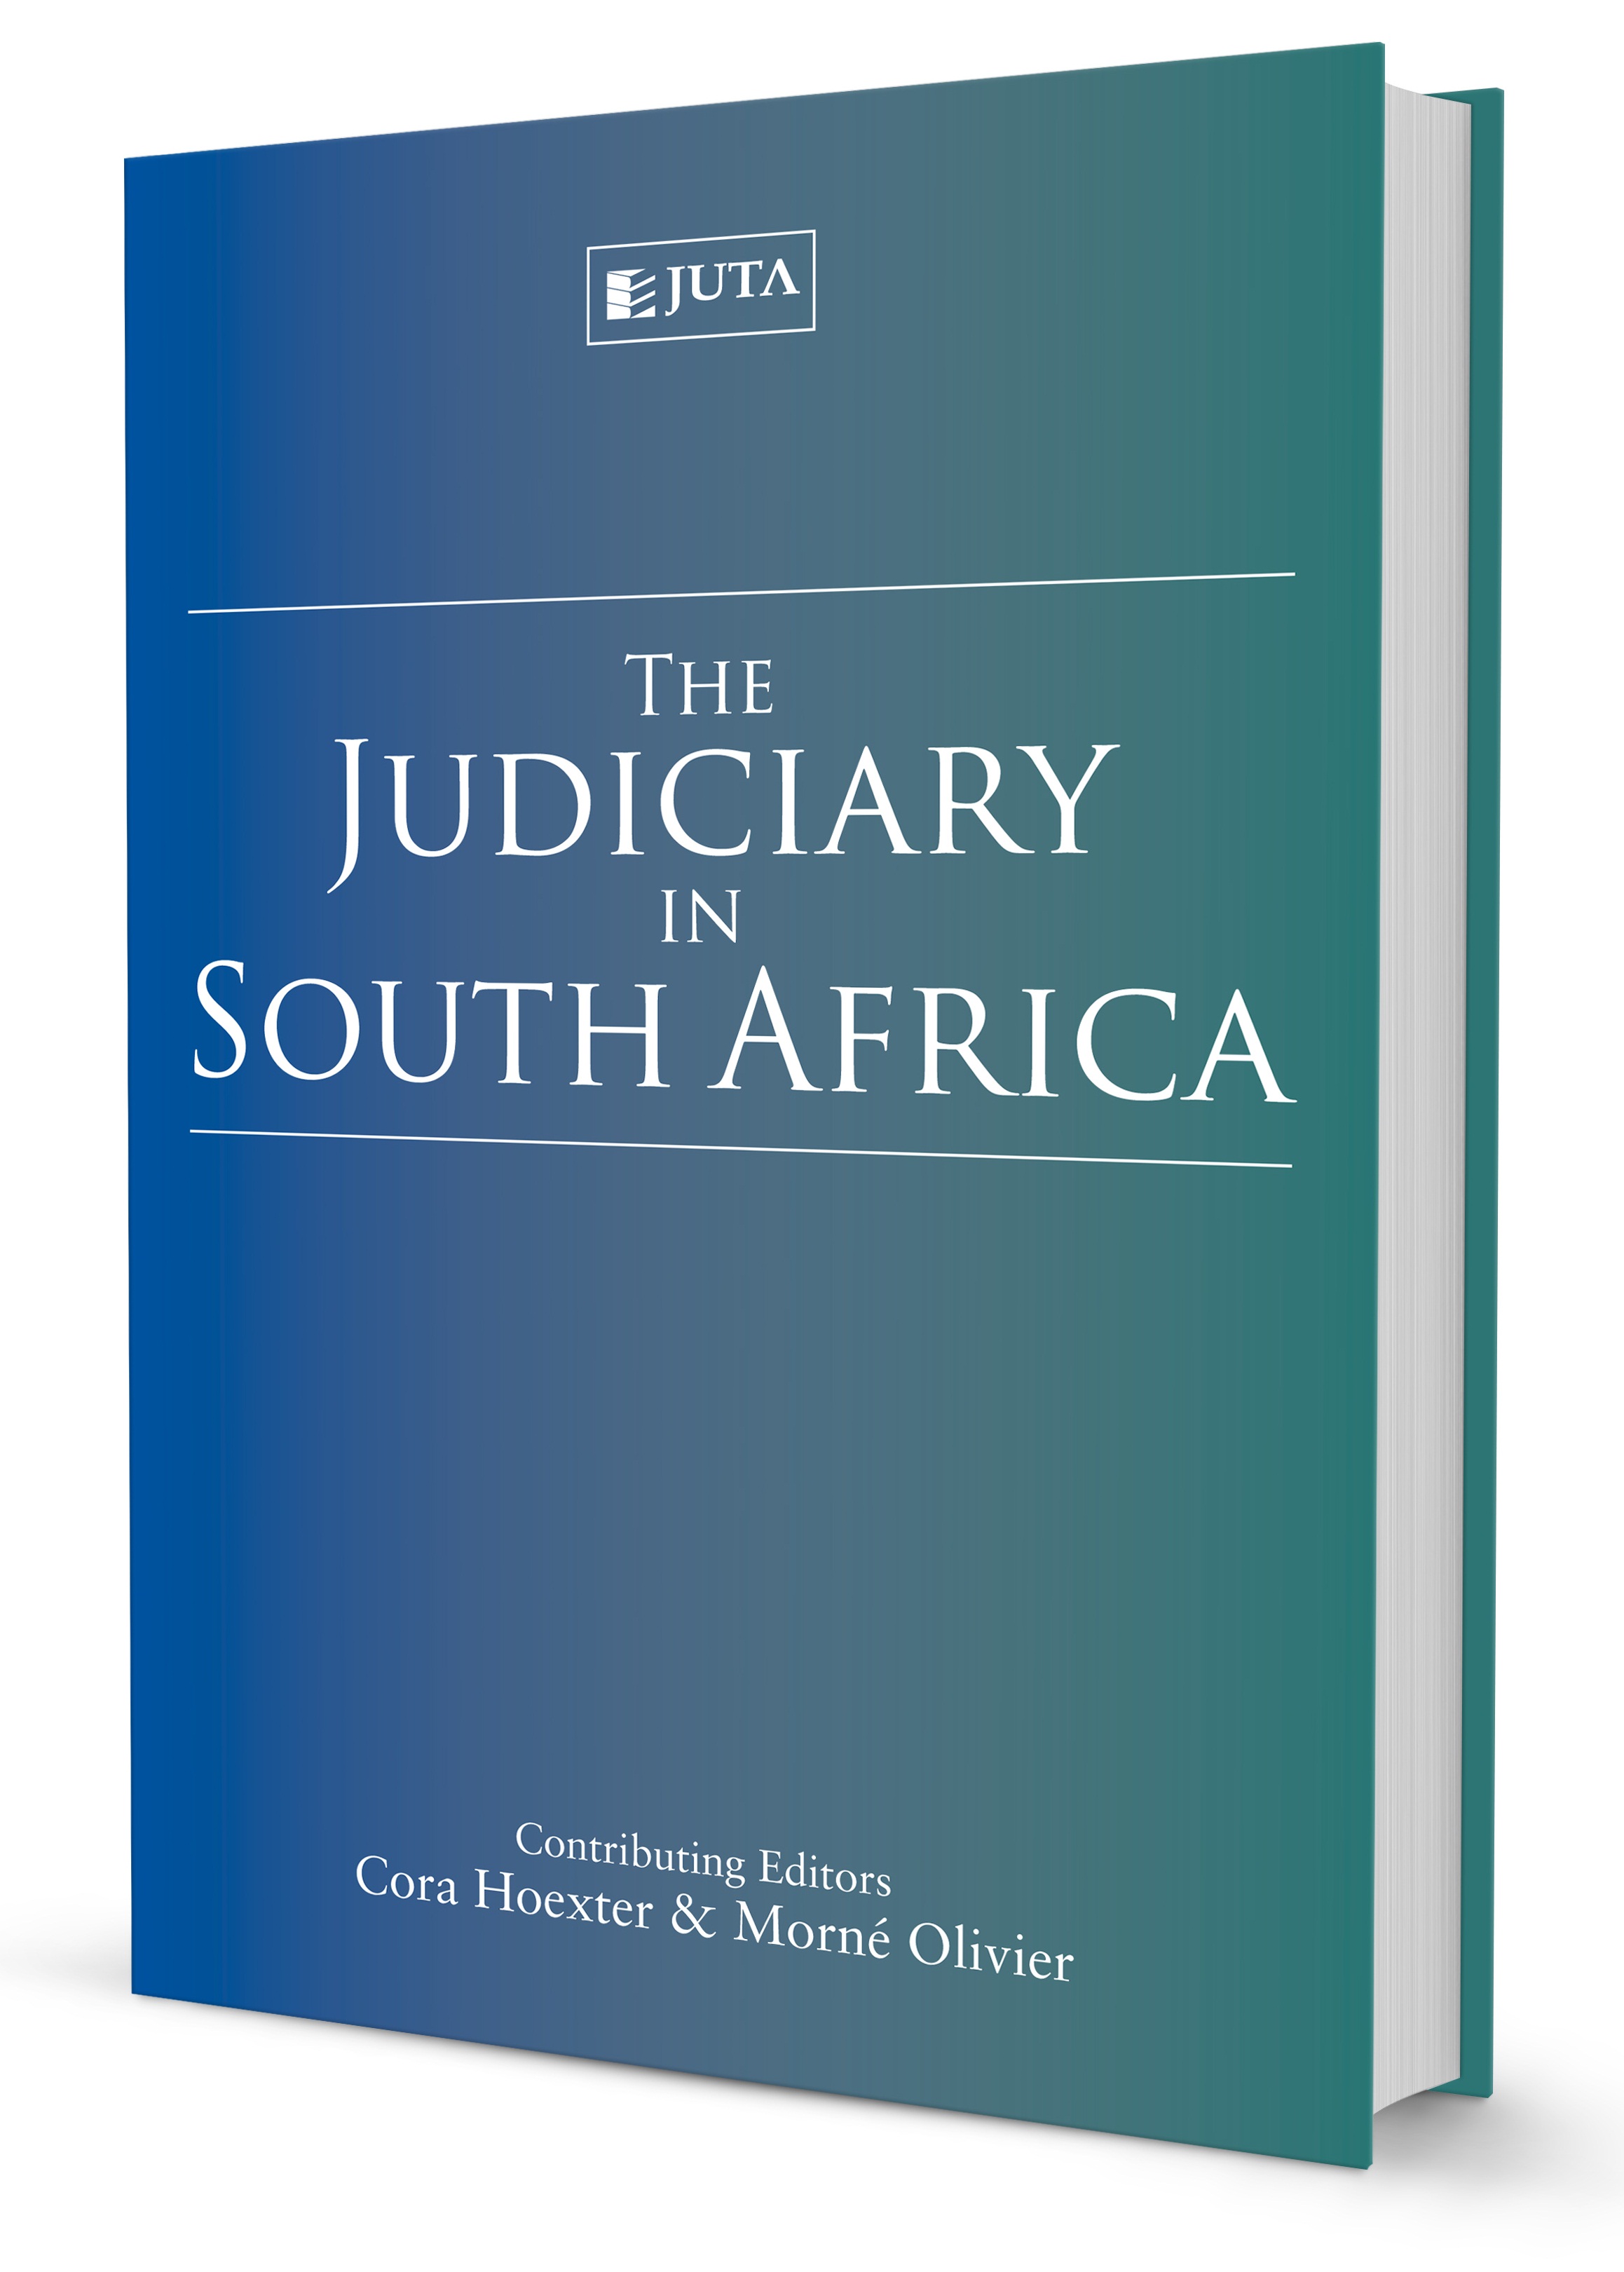 The Judiciary in South Africa